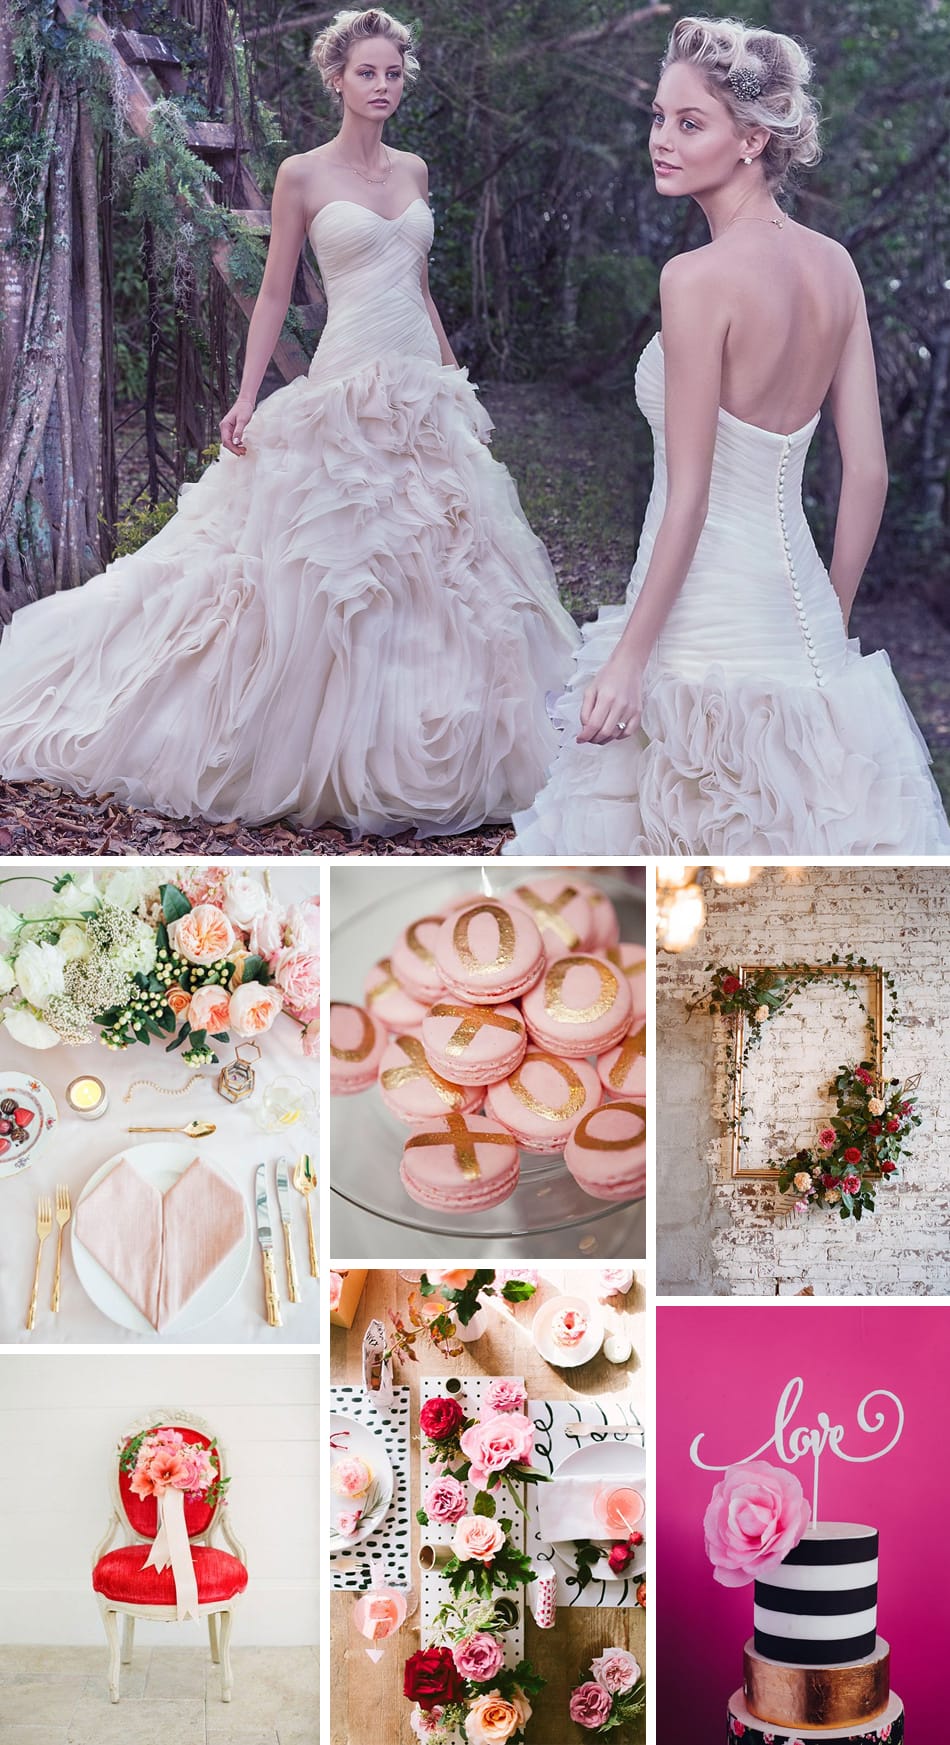 Maggie Sottero's pink wedding dress, Penny, styled for Valentine's Day.